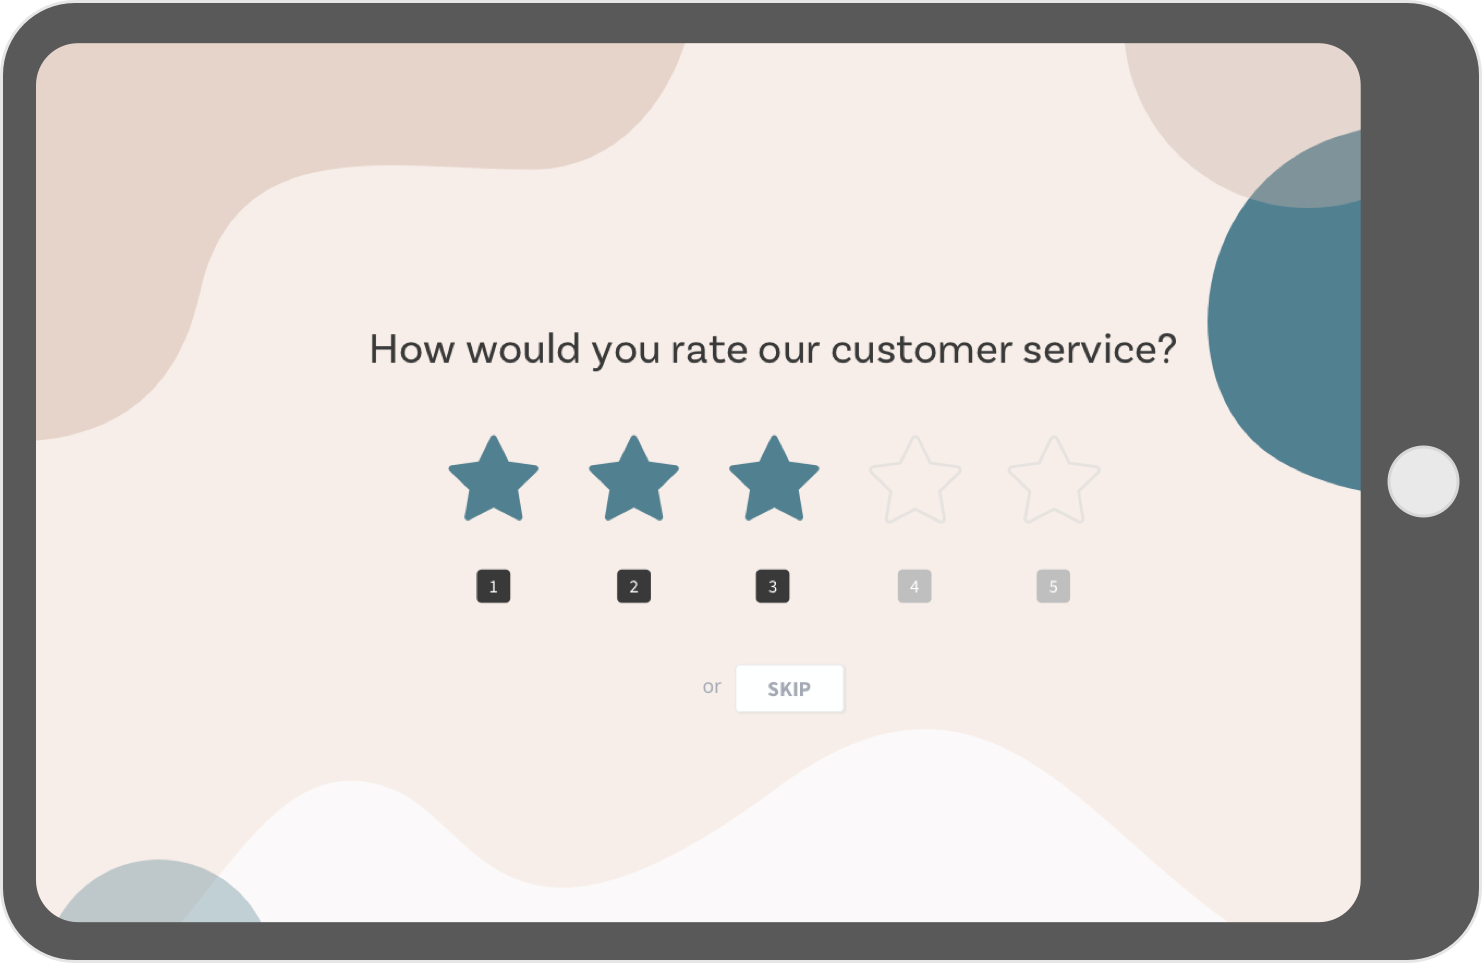 Turn on Kiosk mode in your offline survey tool and collect data.